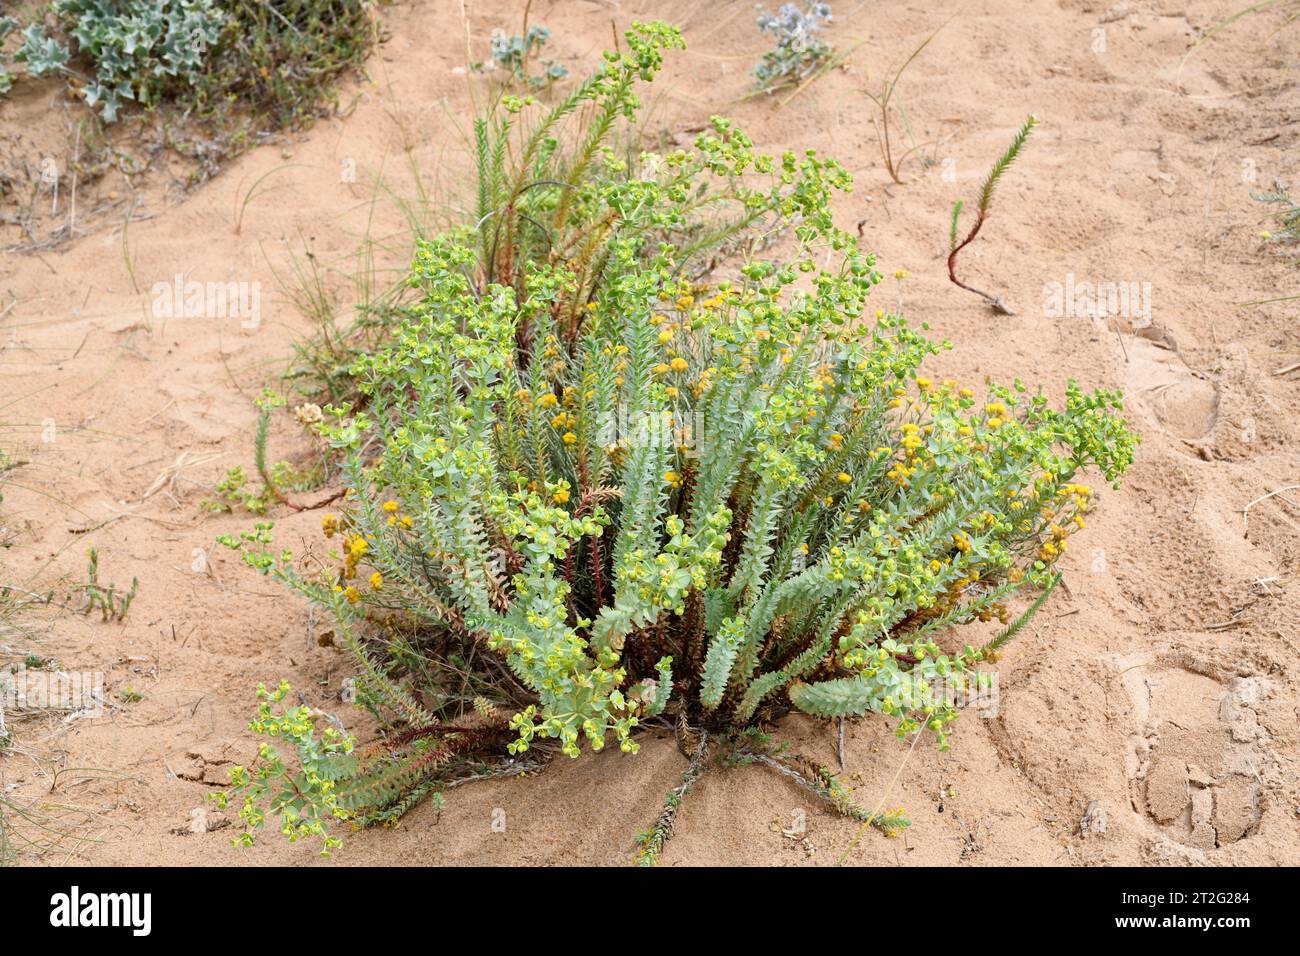 Sea spurge (Euphorbia paralias) is a perennial herb native to coast of Europe, northern Africa and western Asia. This photo was taken in Dunas de Lien Stock Photo